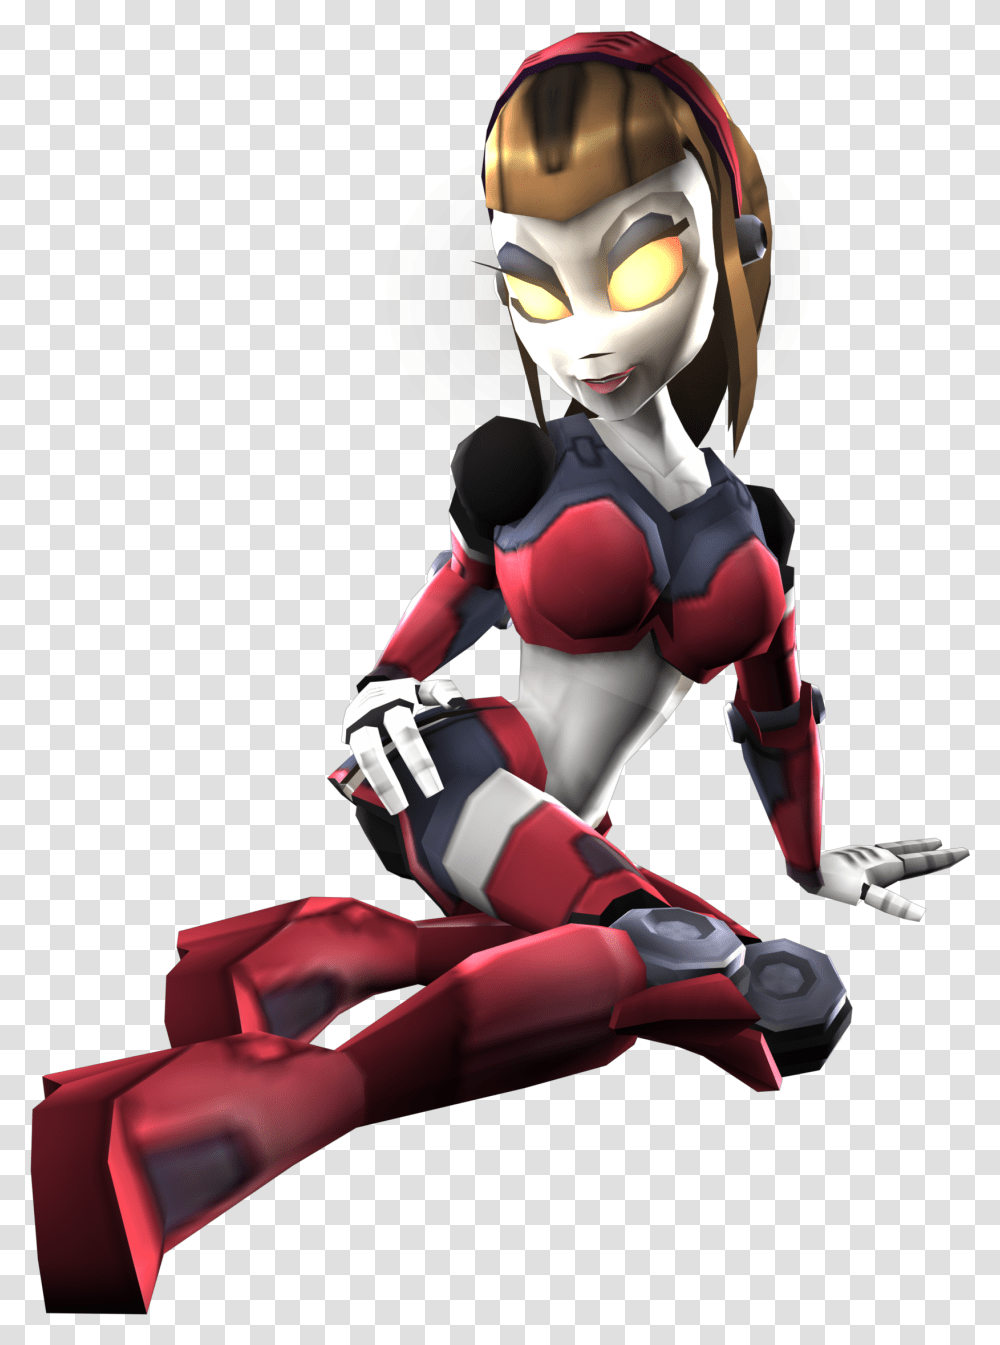 Courtneygearspng 516471 Pop Star Robot Song Squishies Ratchet And Clank Courtney, Toy, Person, People, Clothing Transparent Png